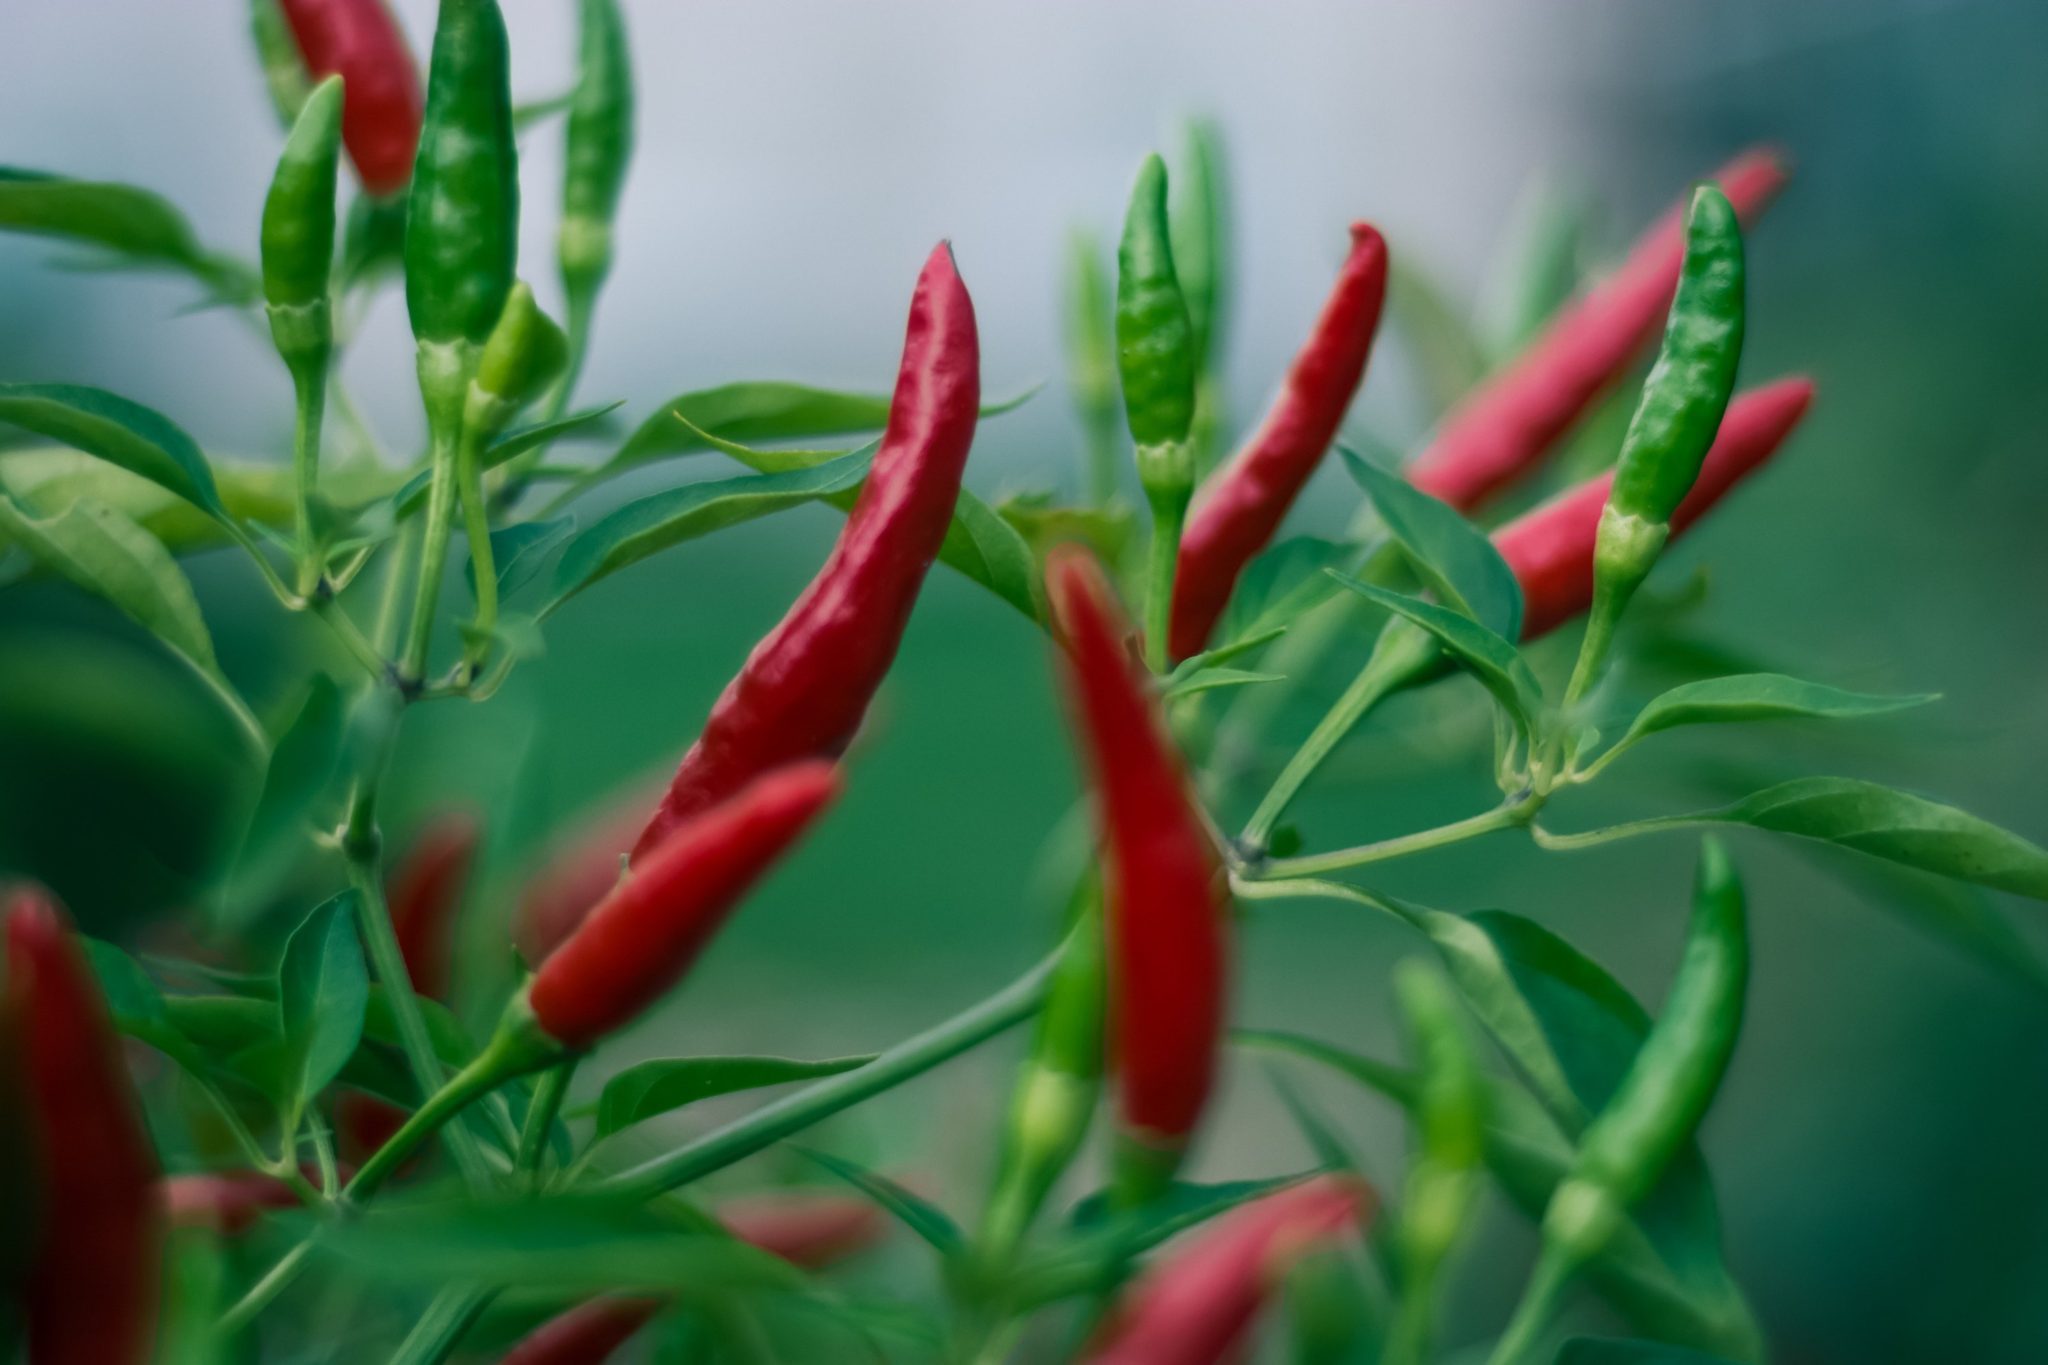 Chilli peppers are rich in magnesium